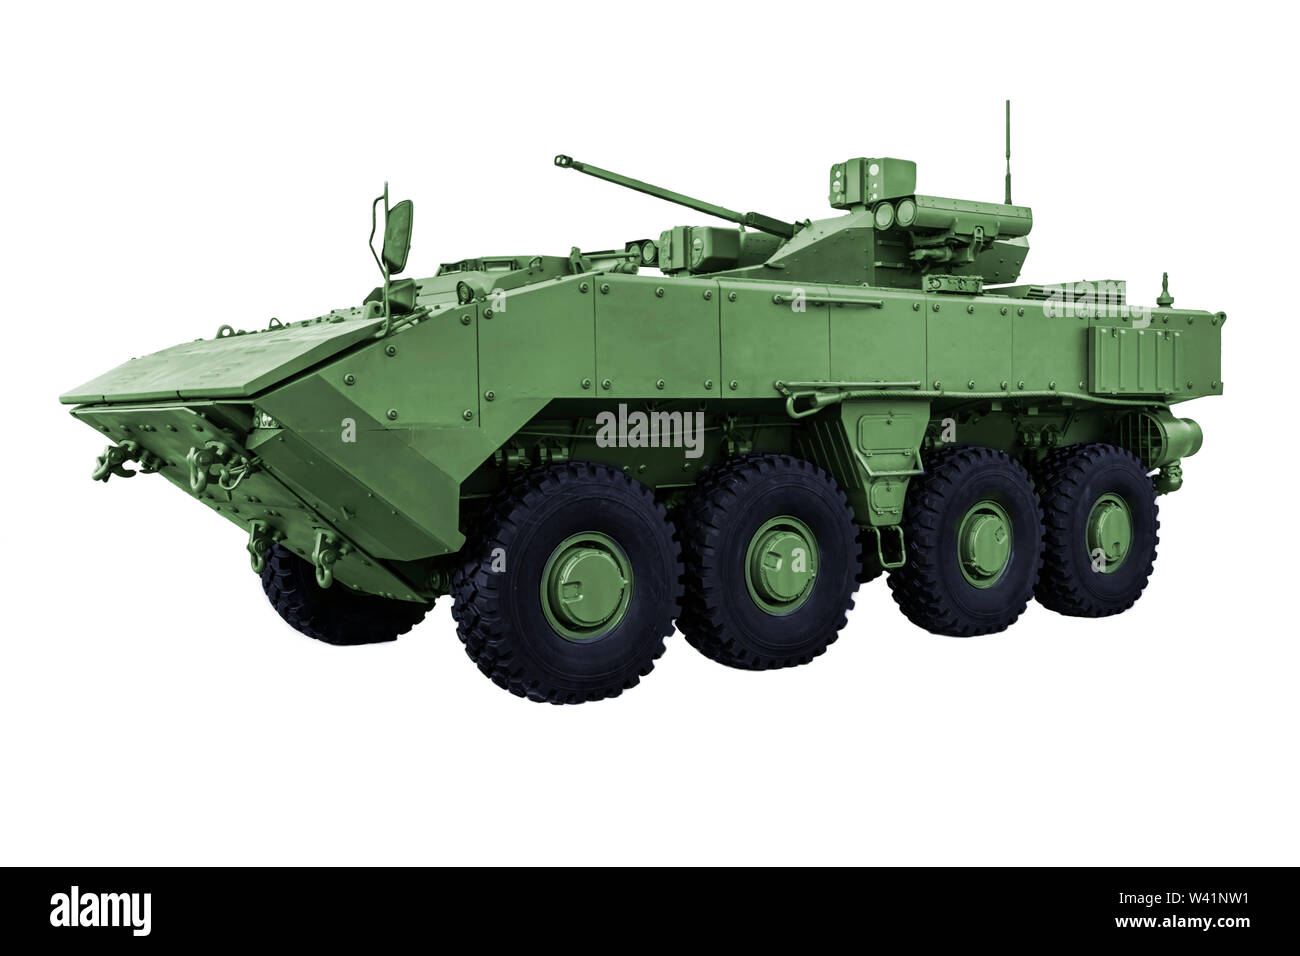 Armored personnel carrier on a white background. Stock Photo